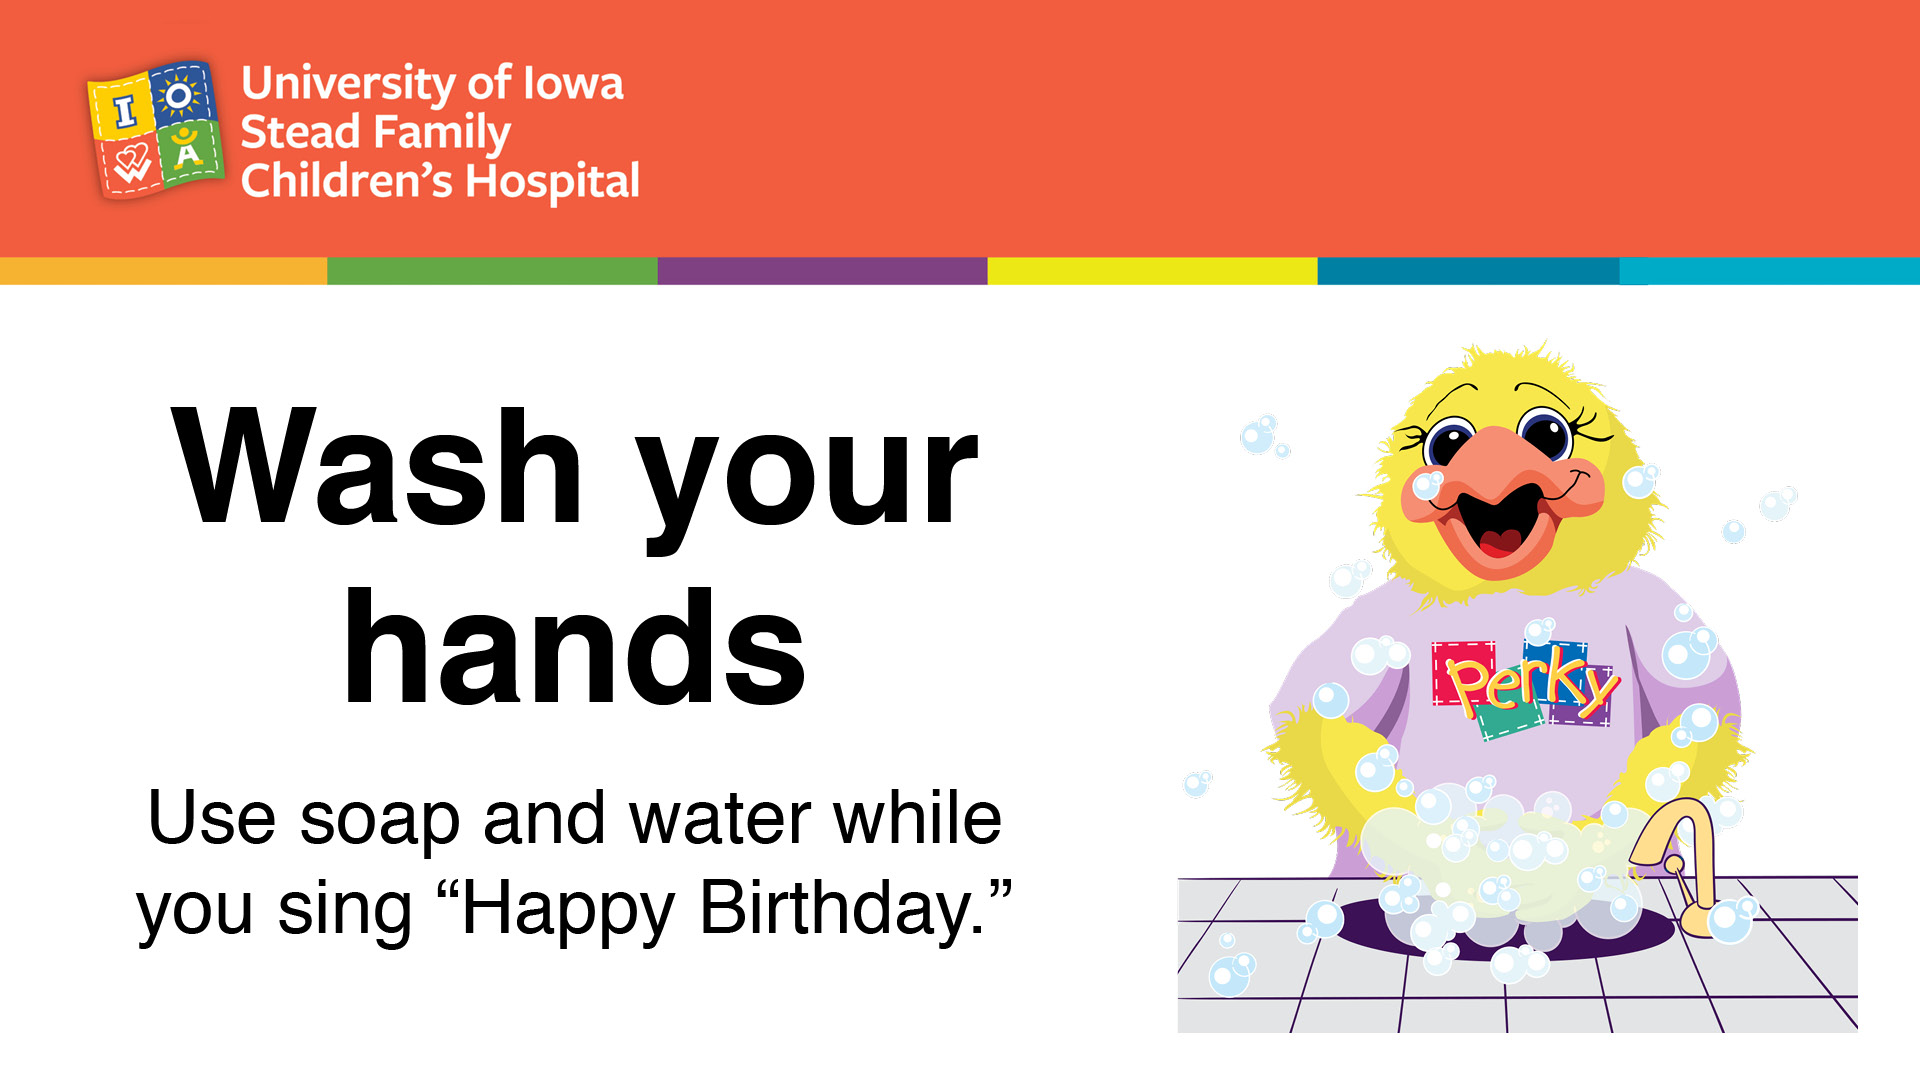 Wash your hands. Use soap and water while you sing "Happy Birthday."